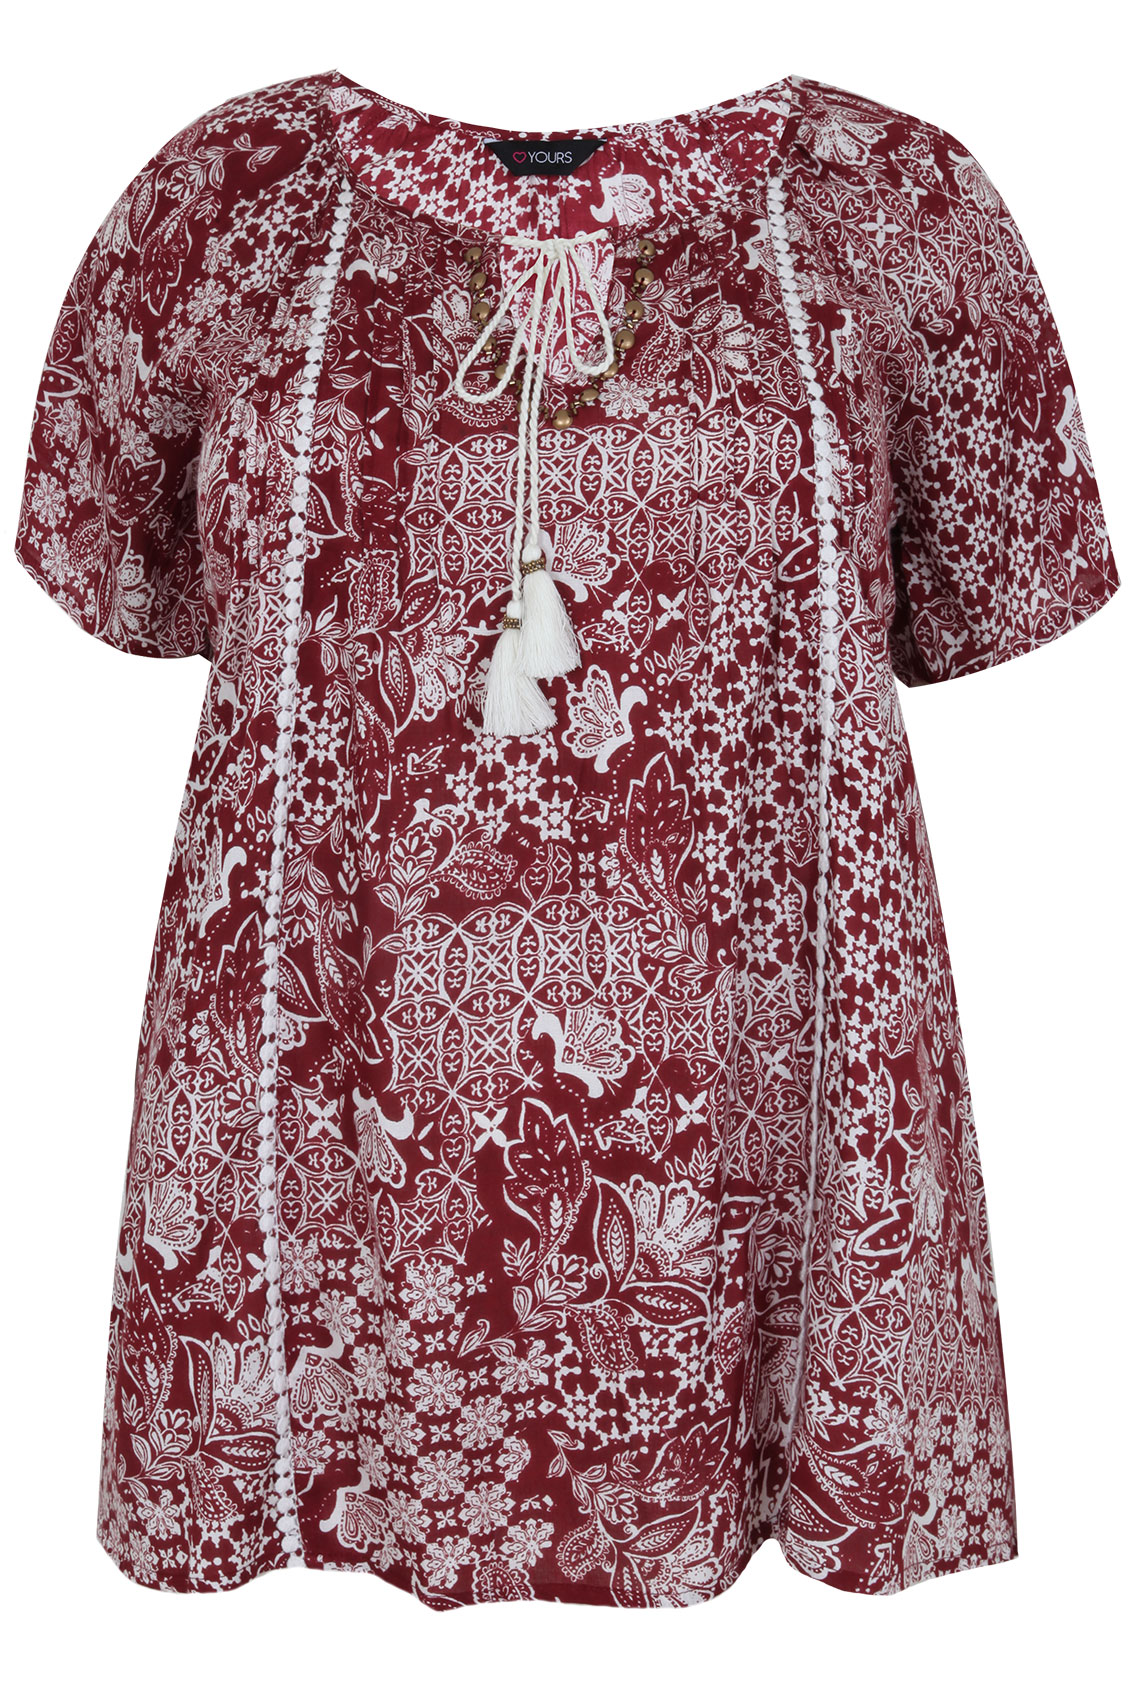 Burgundy & Ivory Mixed Tile Print Gypsy Blouse With Tassel Tie Front ...